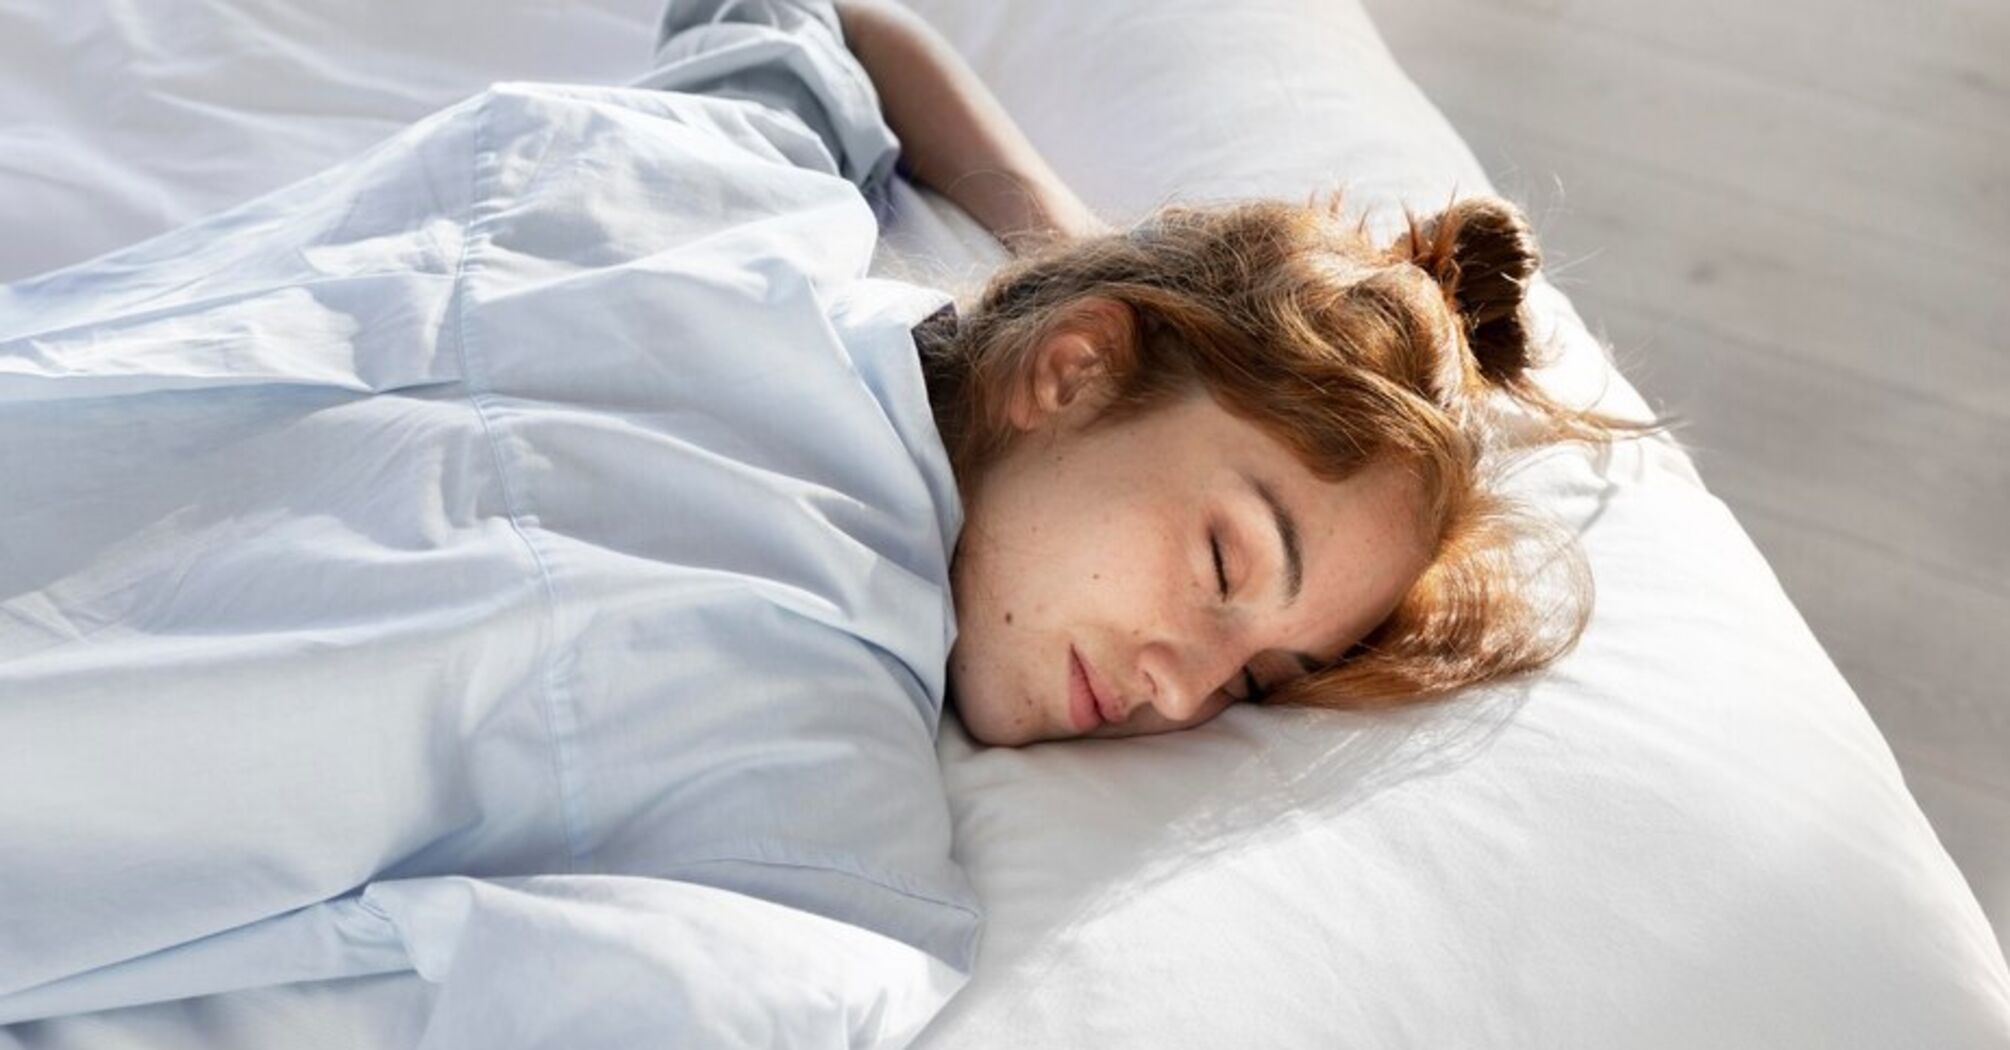 A daily habit that will help you fall asleep quickly is named